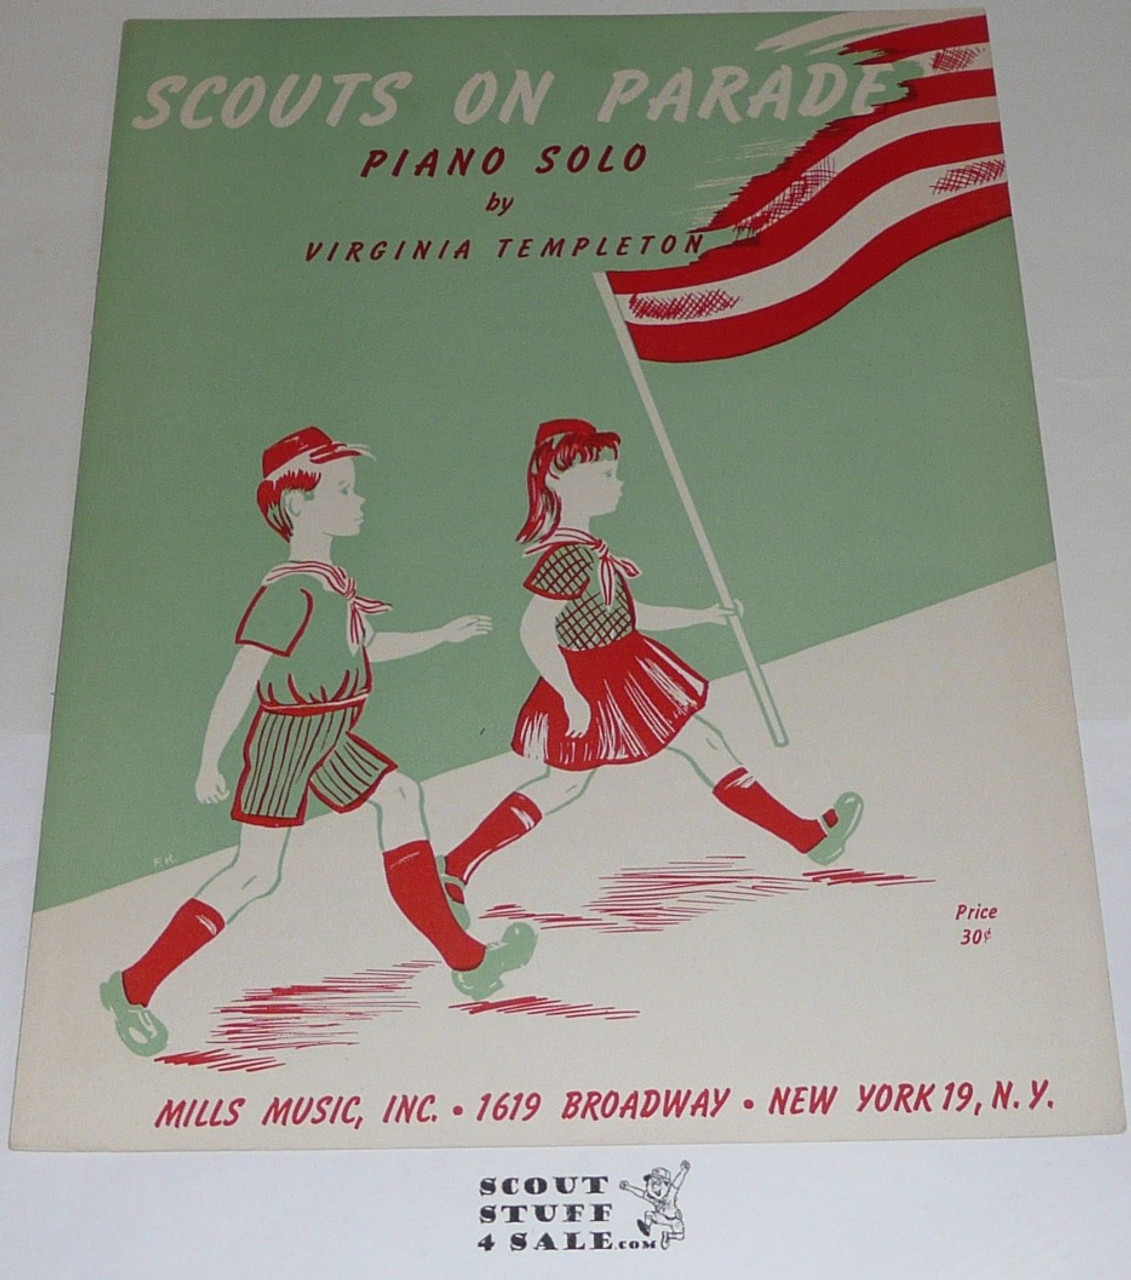 1947 Scouts on Parade Sheet Music, by Virginia Templeton